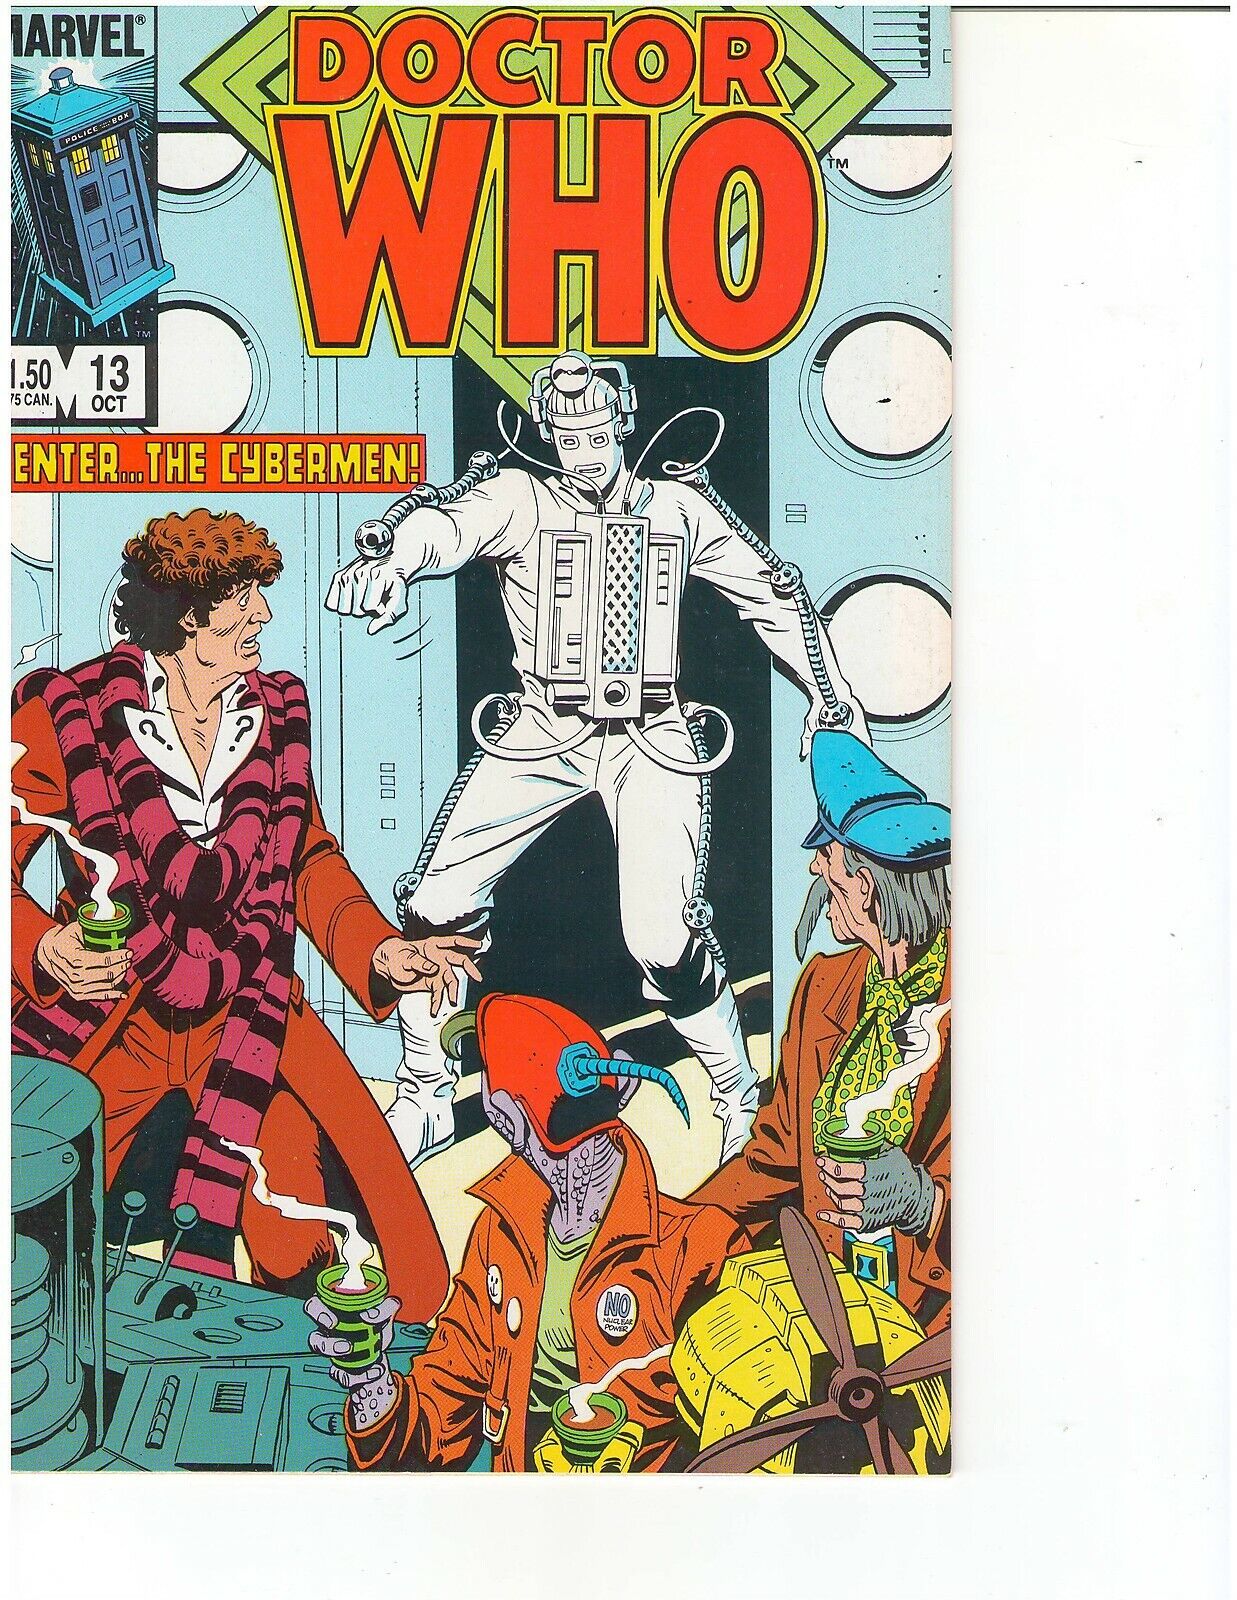 Doctor Who #13 (Oct 1985, Marvel) NEVER READ BAGGED BOARDED